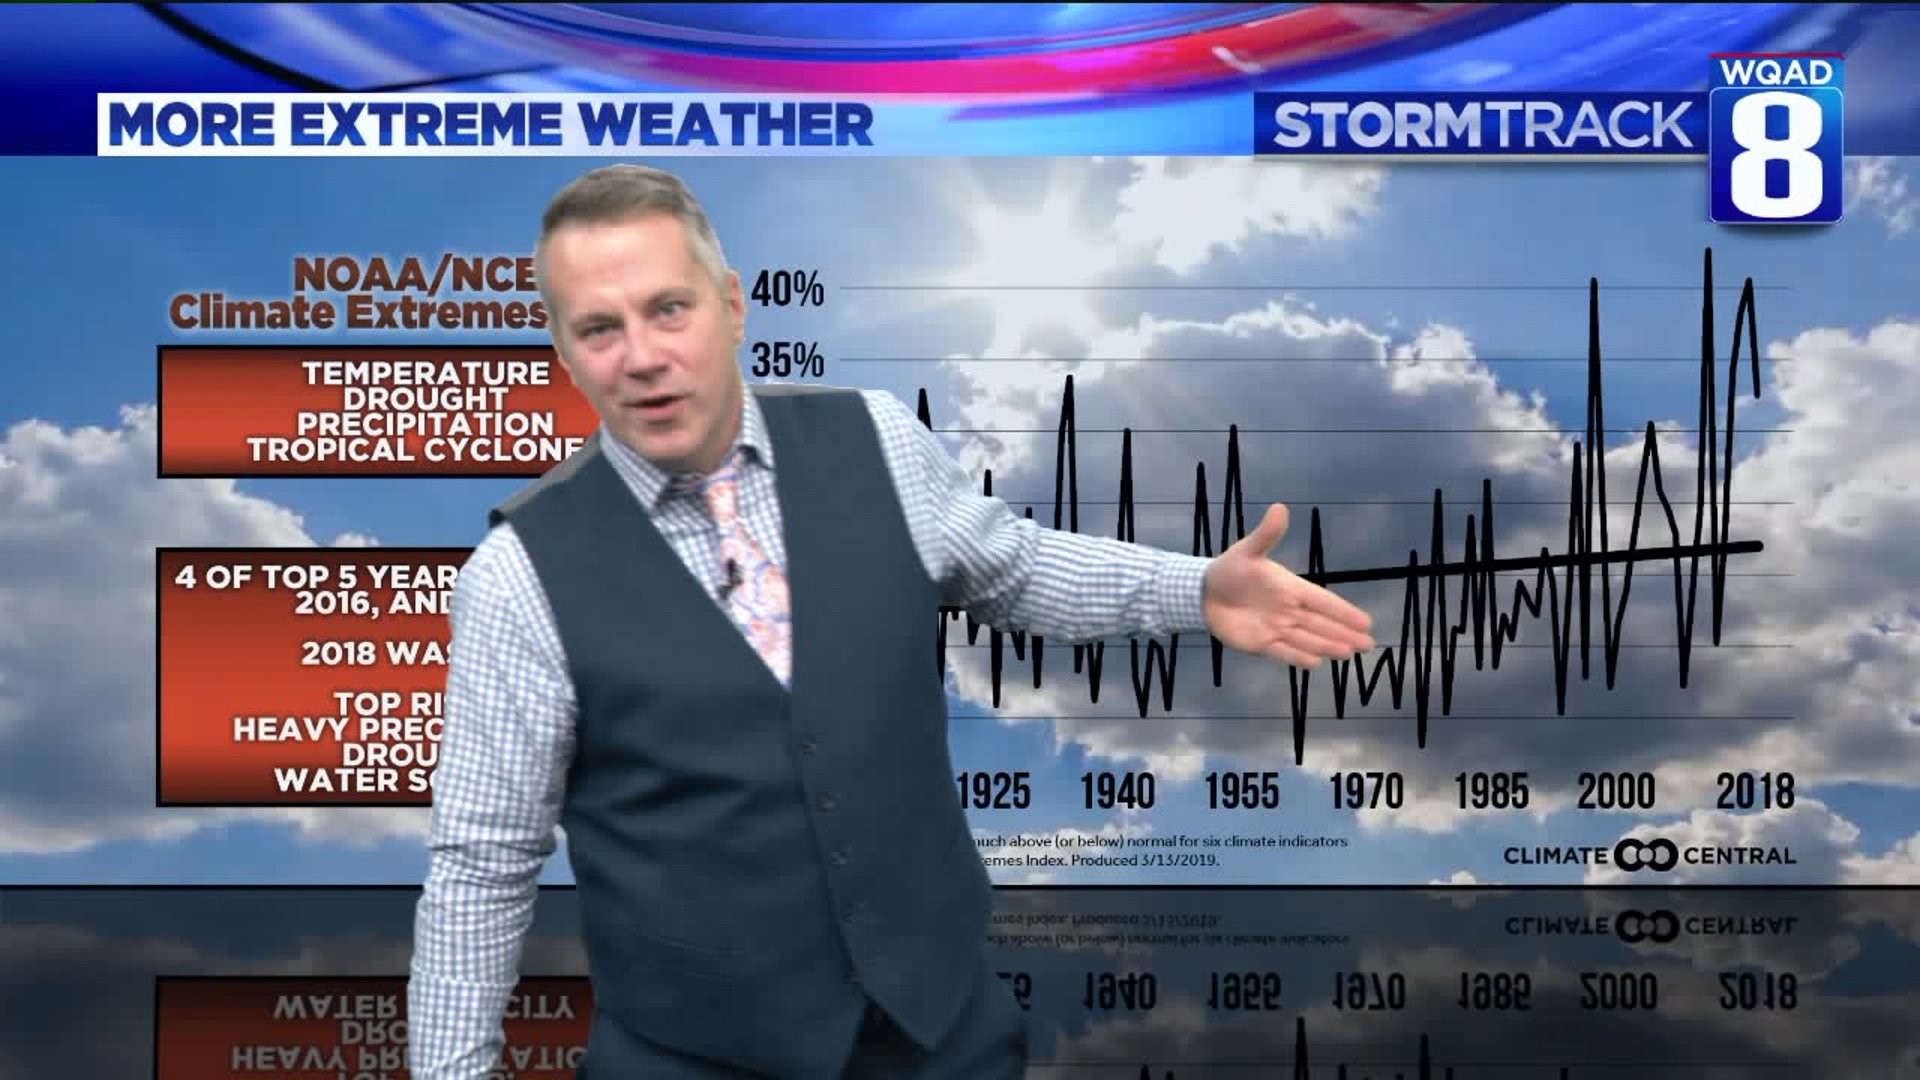 Eric explains how climate change is causing more extreme weather events